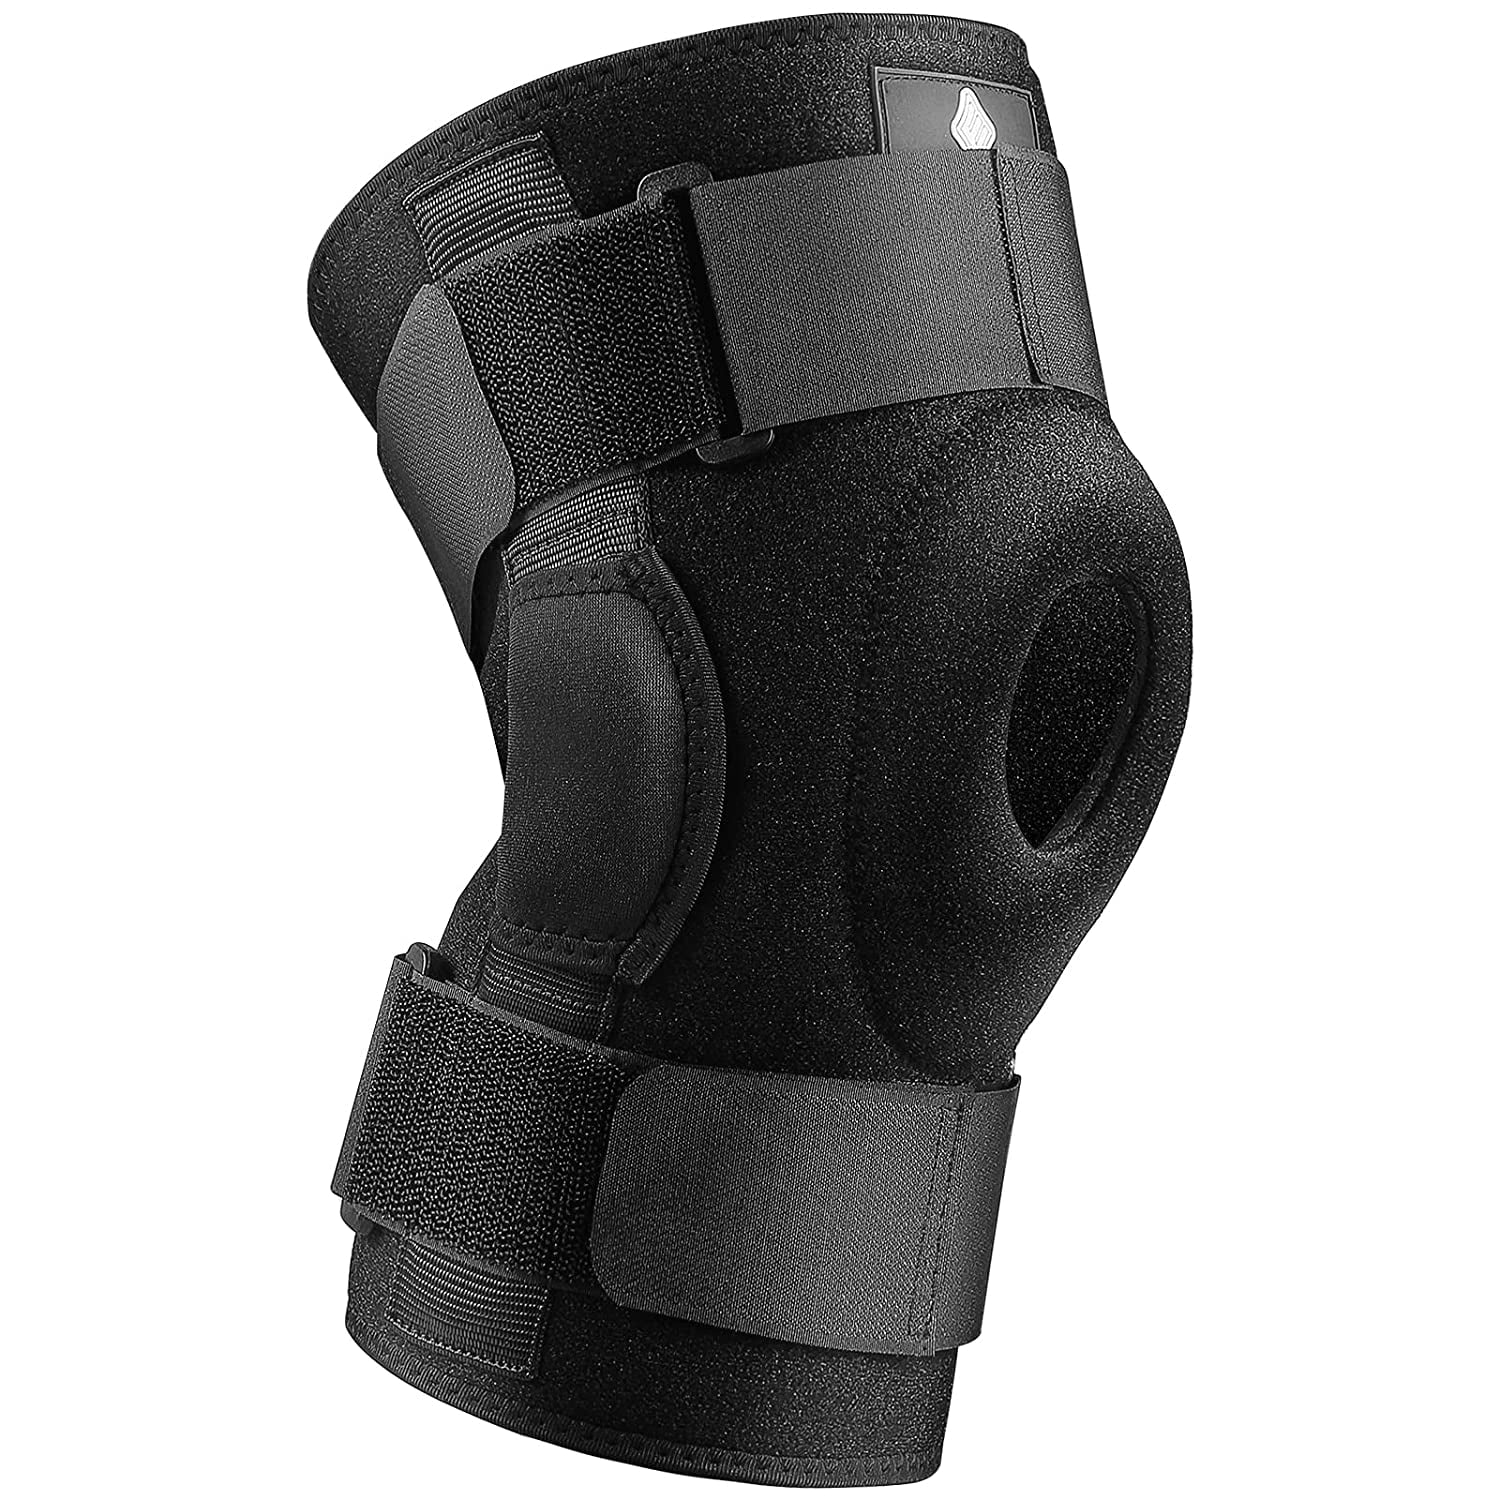 NEENCA hinged knee brace, adjustable compression knee brace for men and  women, open patella knee brace for knee pain, swelling, meniscus tear, ACL,  PCL, MCL, joint pain relief, injury recovery. 